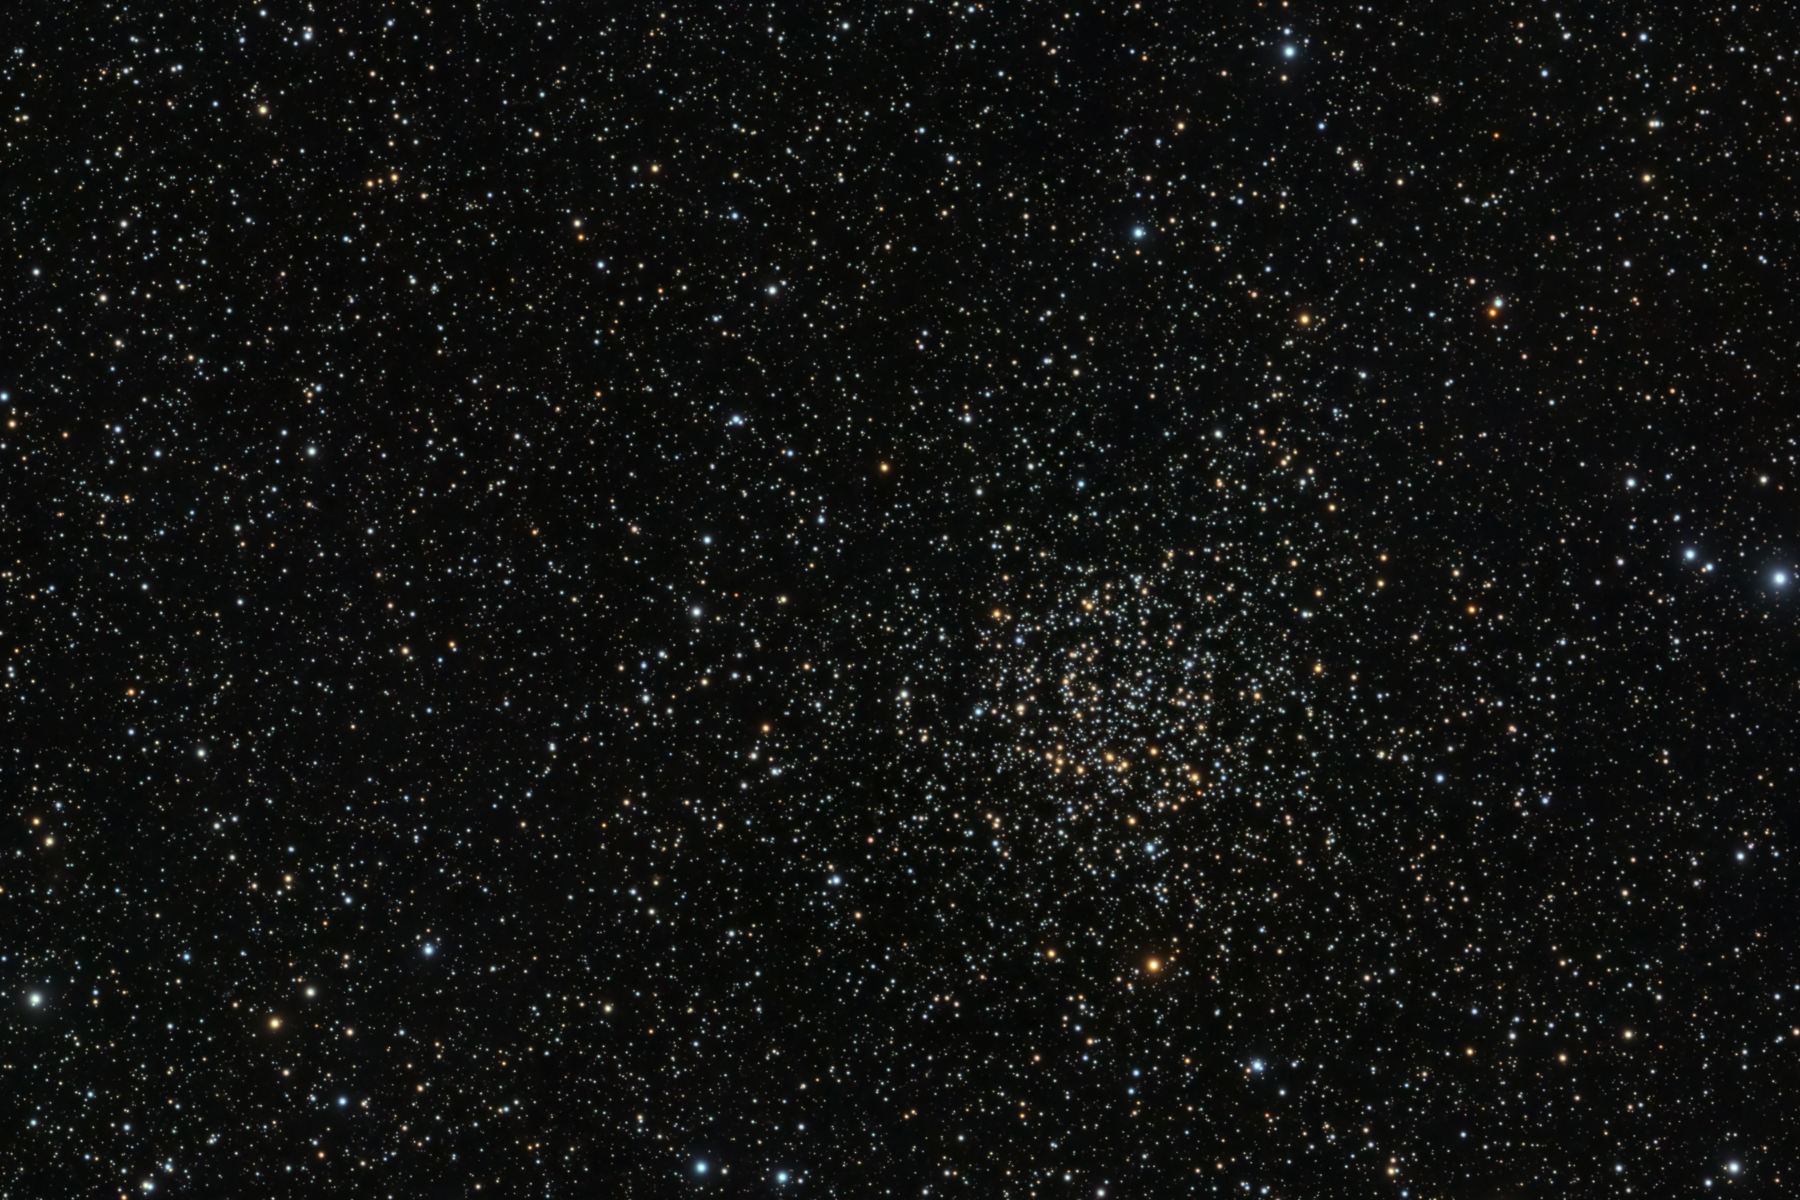 NGC 7789 in Cassiopeia